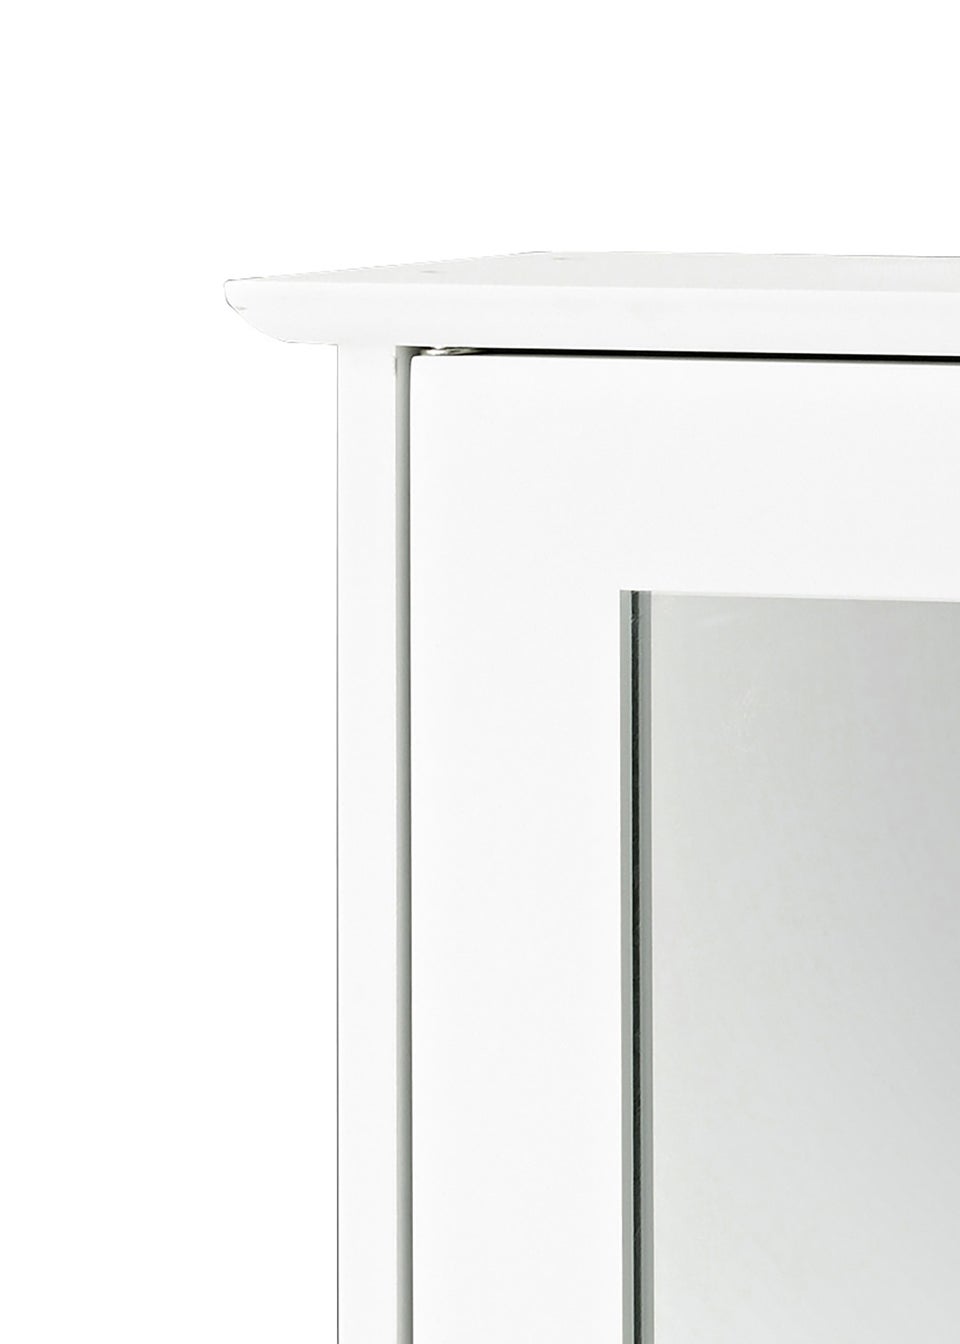 LPD Furniture Alaska Wall Cabinet With Mirror White (530x150x340mm)